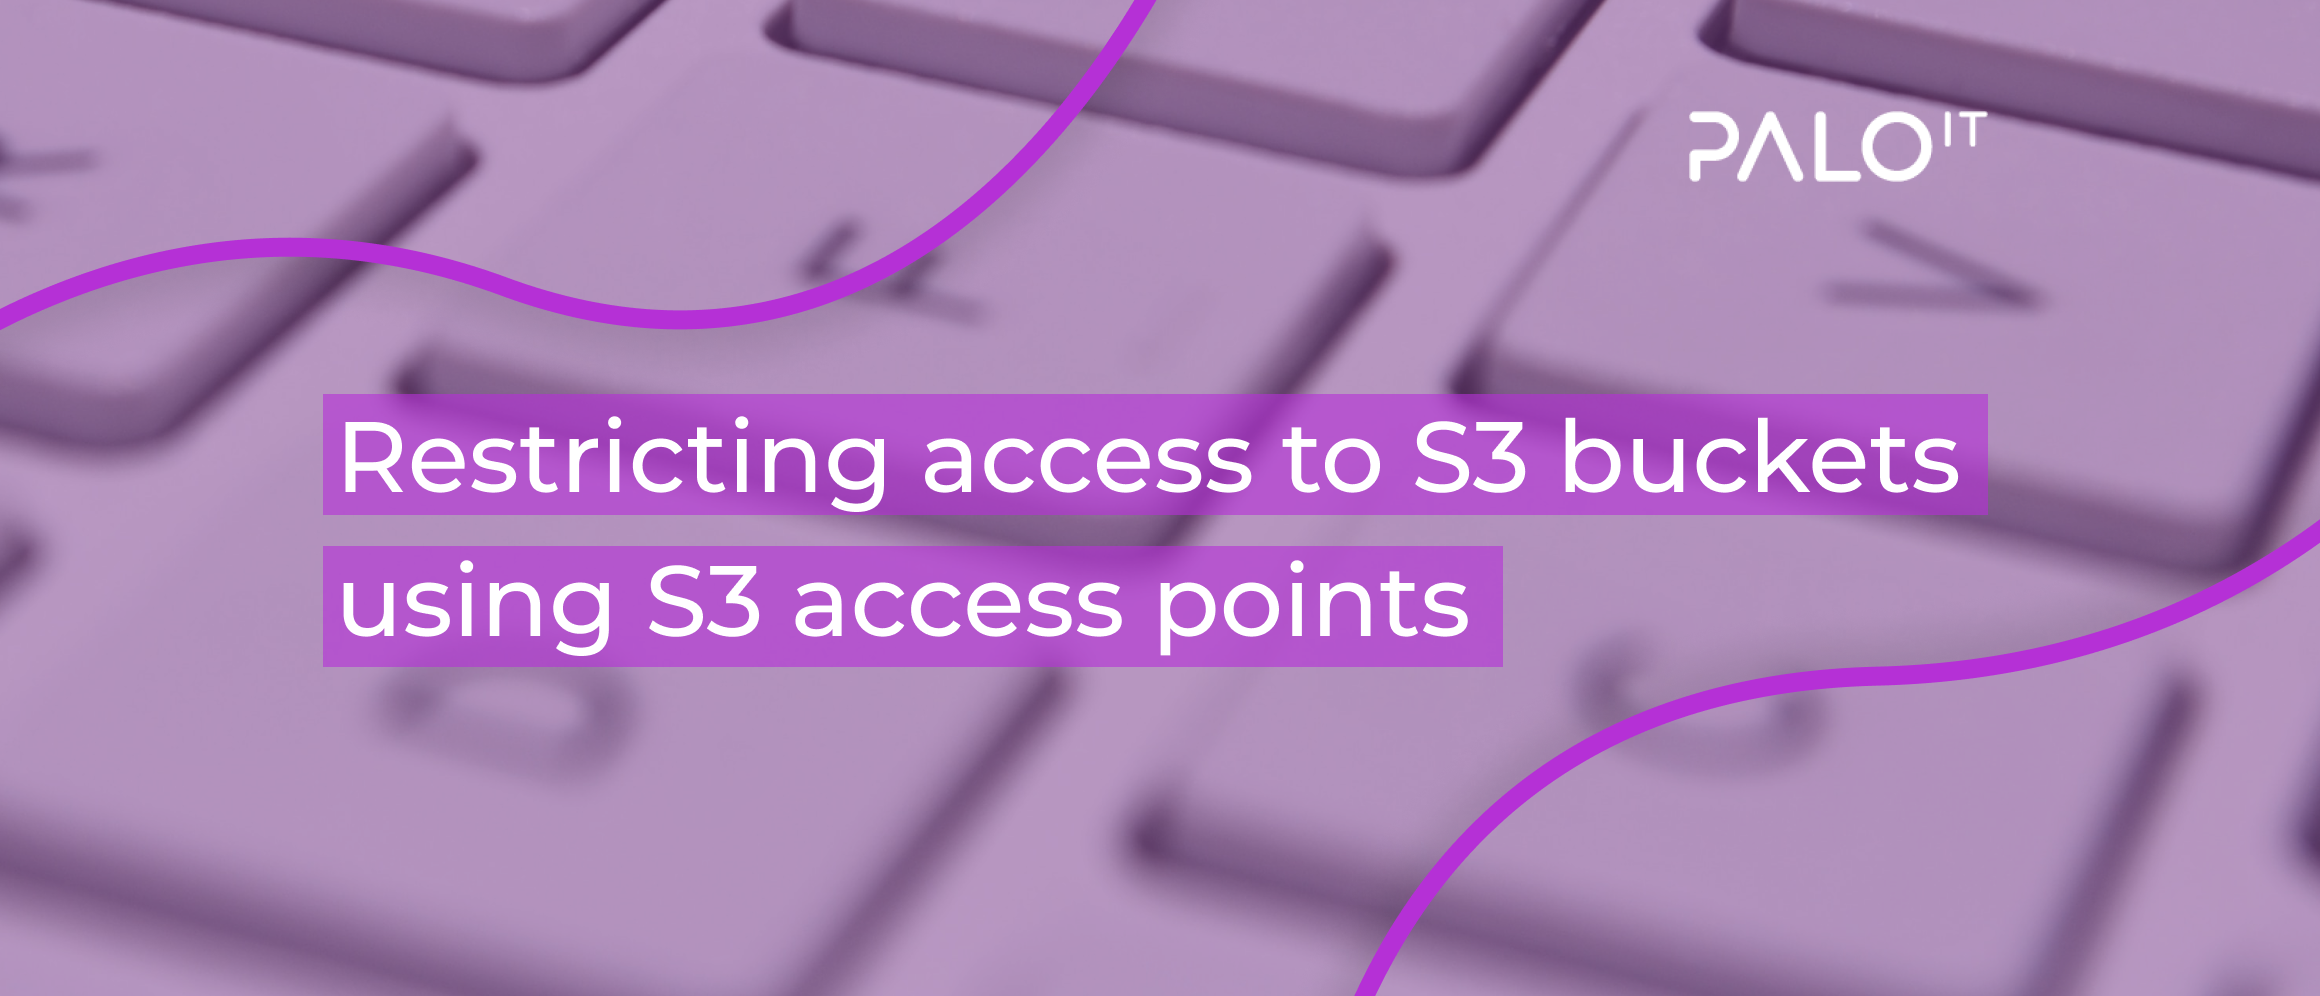 Restricting Access to S3 Bucket Using S3 Access Points